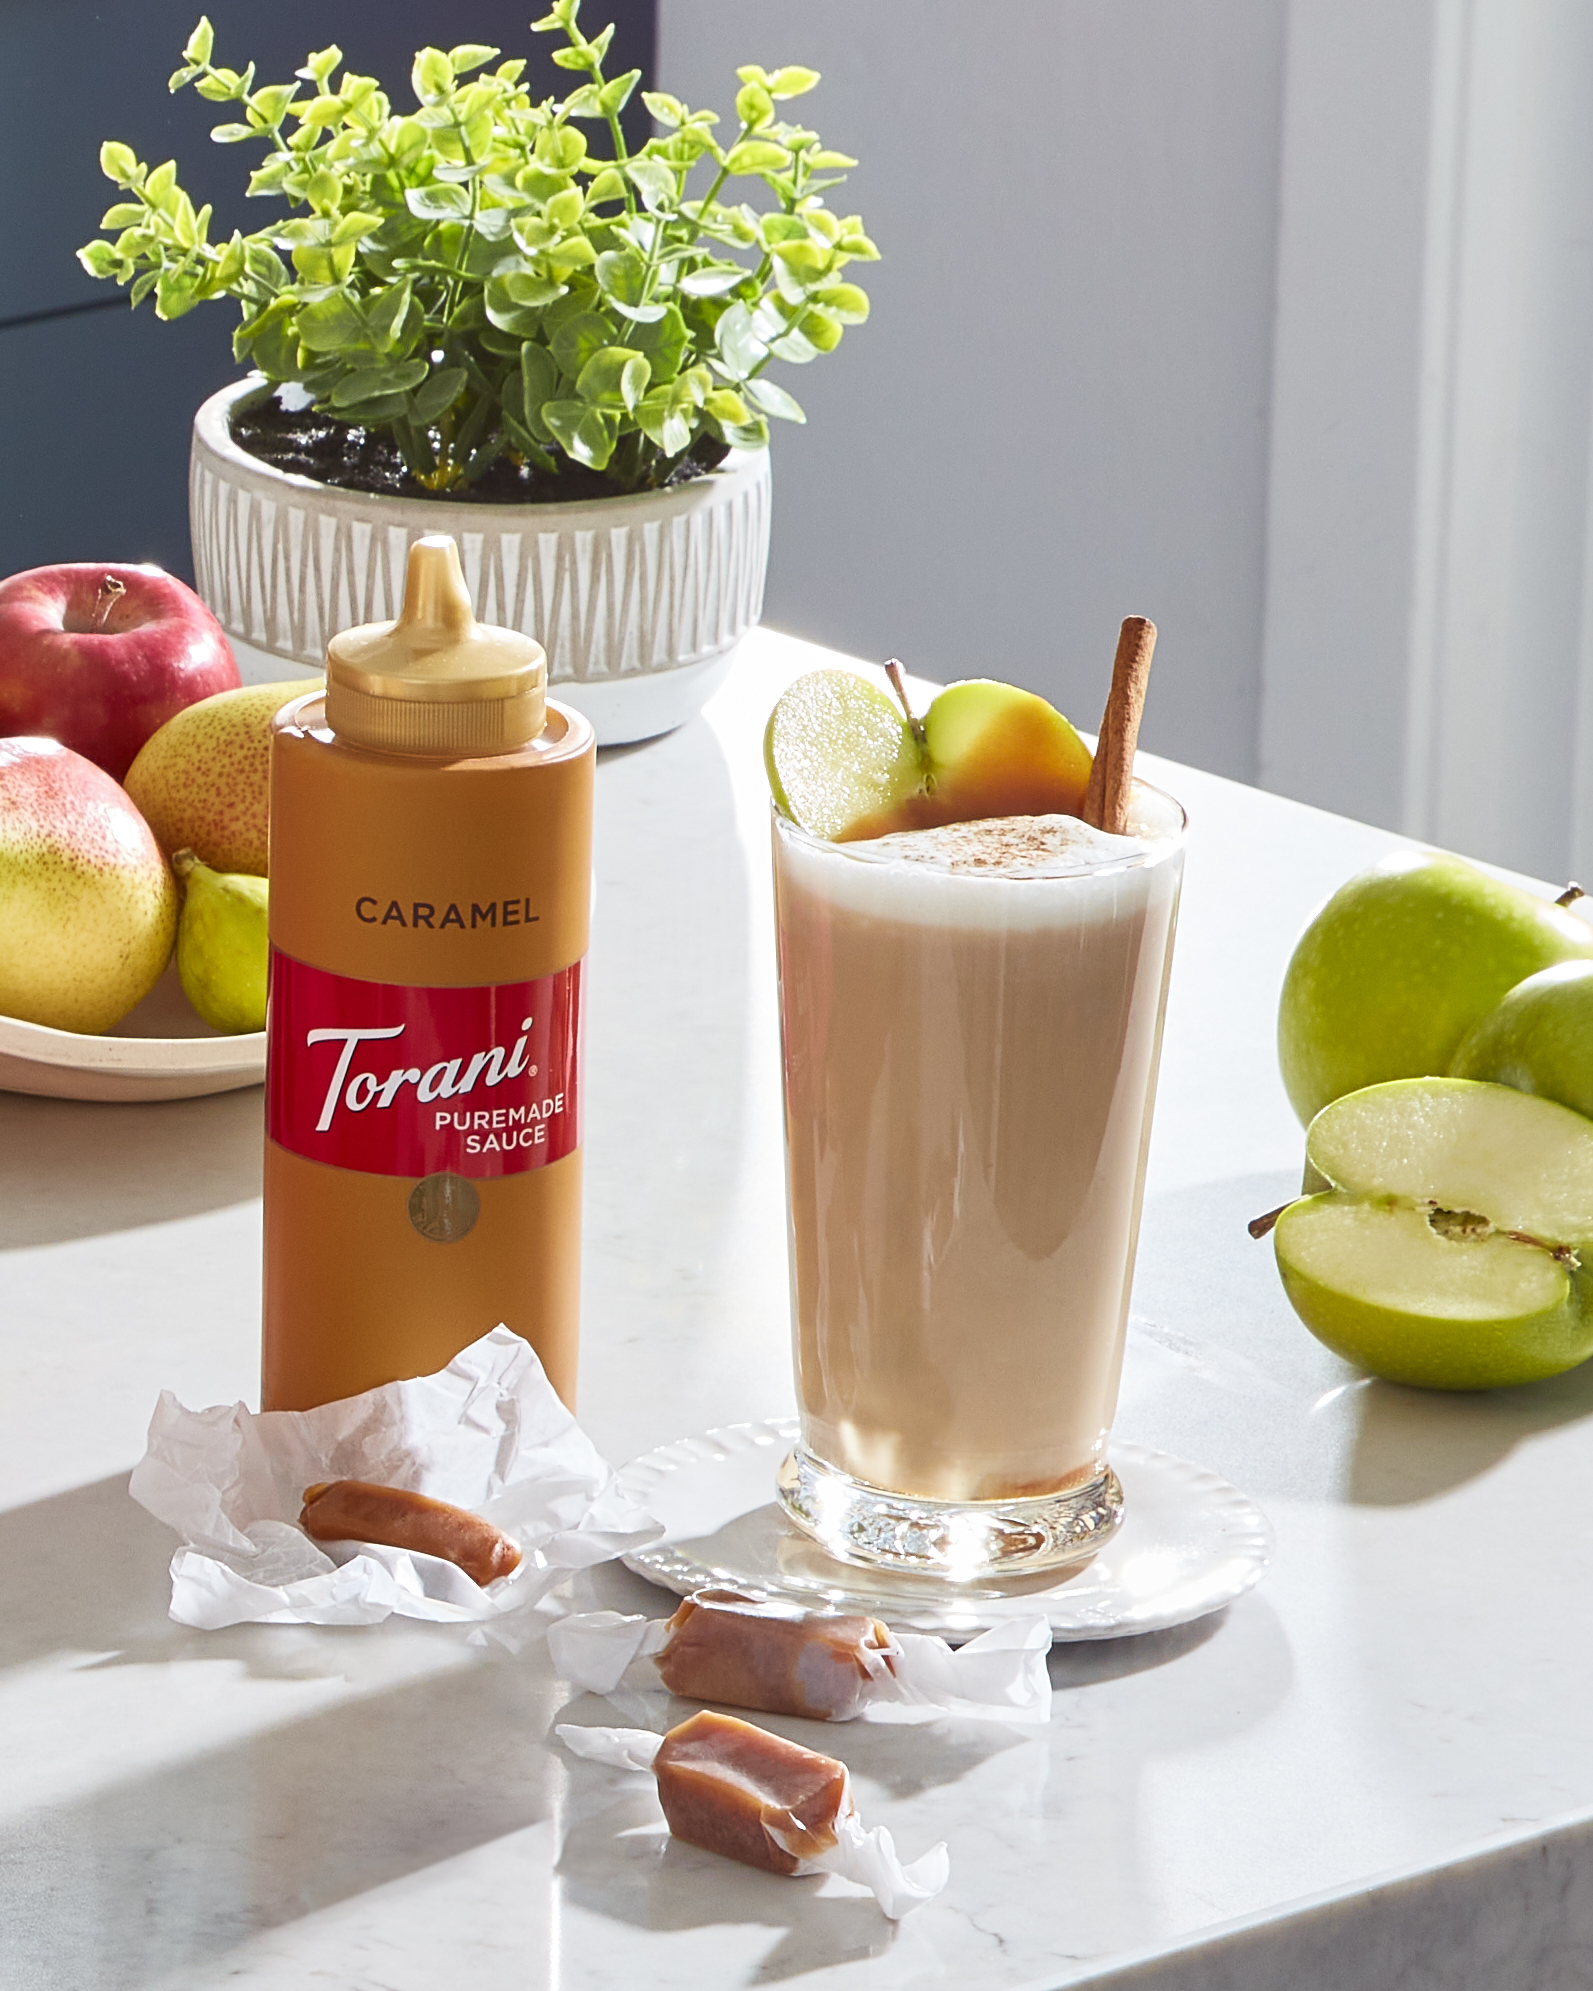 torani caramel syrup bottle image with caramel apple latte on table/></p>

<p><strong>INGREDIENTS</strong></p>

<p>1 Tbsp (1/2 oz) Torani Puremade Caramel Sauce</p>

<p>1 Tbsp (1/2 oz) Torani Puremade Green Apple Syrup</p>

<p>1 cup (8 oz) milk</p>

<p>1/2 cup (4 oz) strong brewed coffee or 2 shots of espresso</p>

<h4>INSTRUCTIONS:</h4>

<p>Steam together milk and Torani. Pour into a tall glass and add coffee. Garnish with Caramel and green apple slices</p>

<hr />
<p><strong>The Black & White Frappe</strong></p>

<p>In many delis in New York’s Manhattan, you’ll find the iconic Black and White Cookie. While we can’t pretend this drink will give you the full texture of that cookie experience, it will give you the right flavor - a beautiful mix of chocolate and vanilla. The espresso adds an additional pop to the drink that will leave you smiling for the rest of the day. At least that’s what happened to us. </p>

<p><img src=